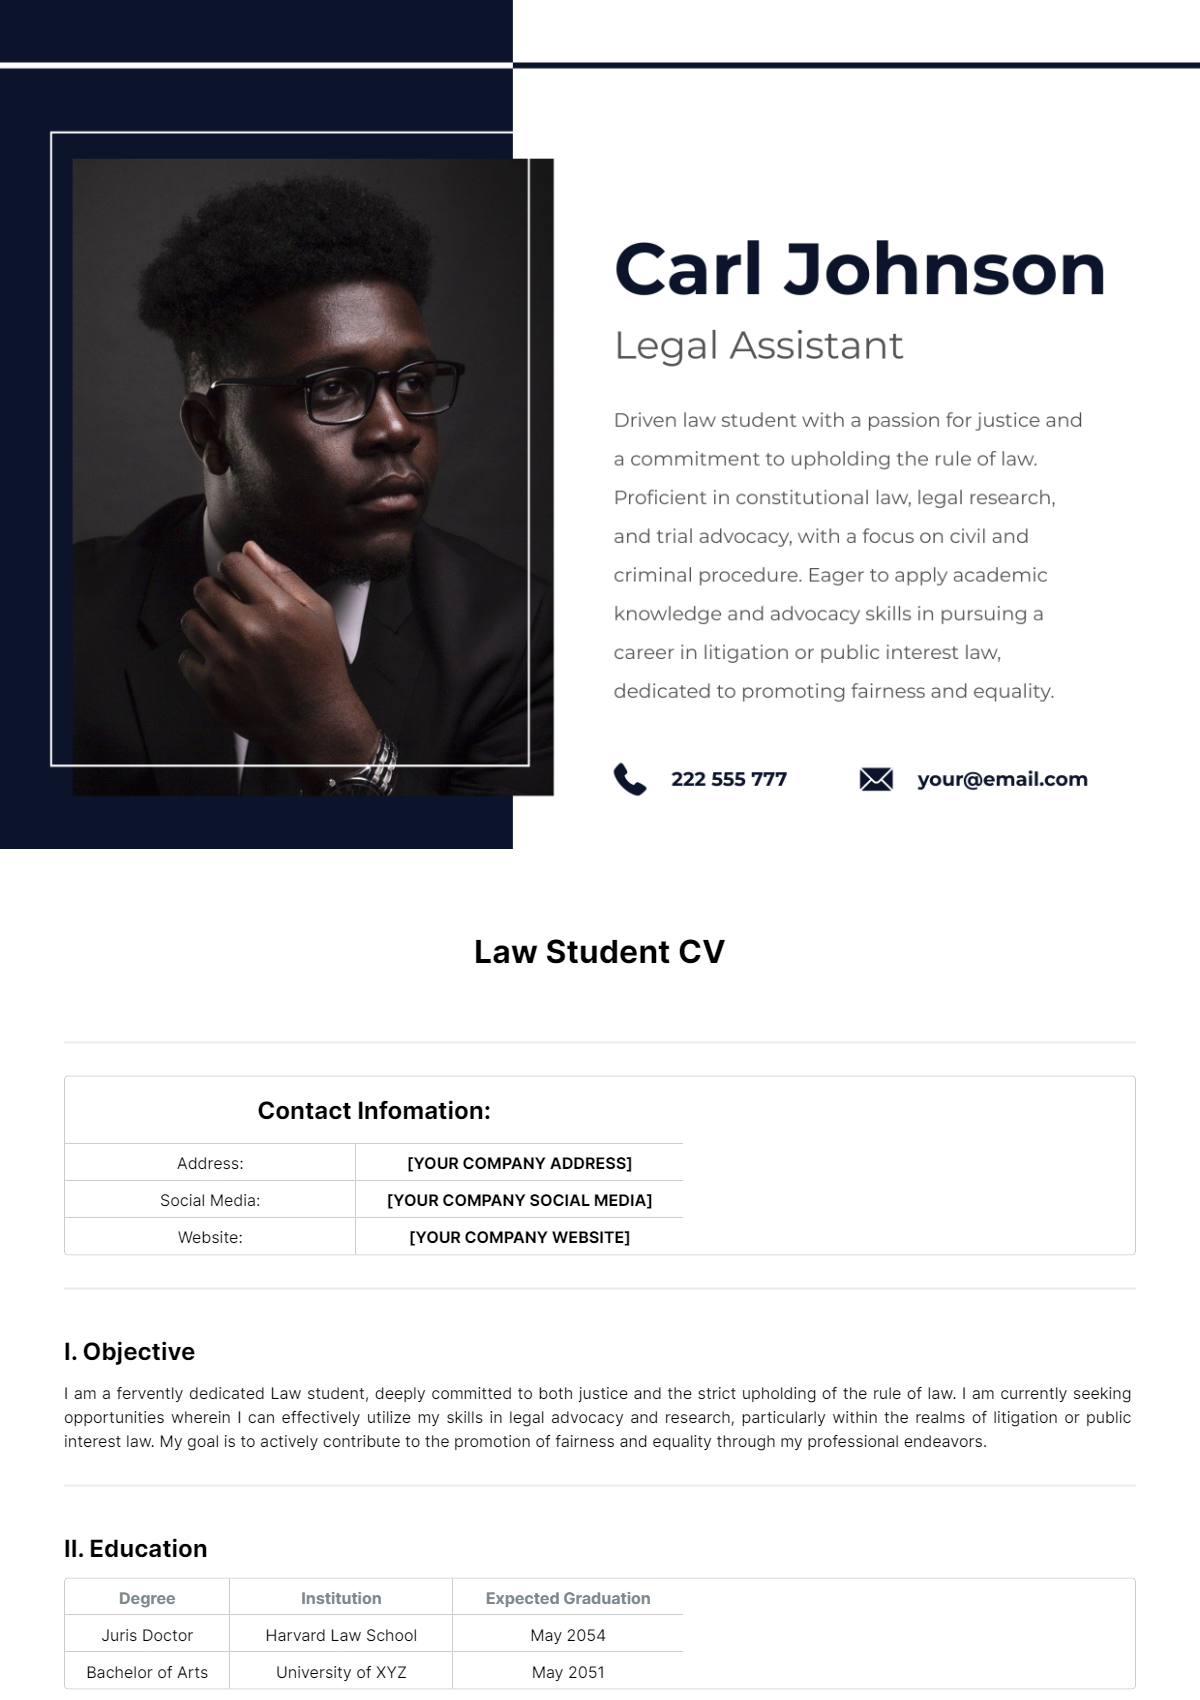 Free Law Student CV Template